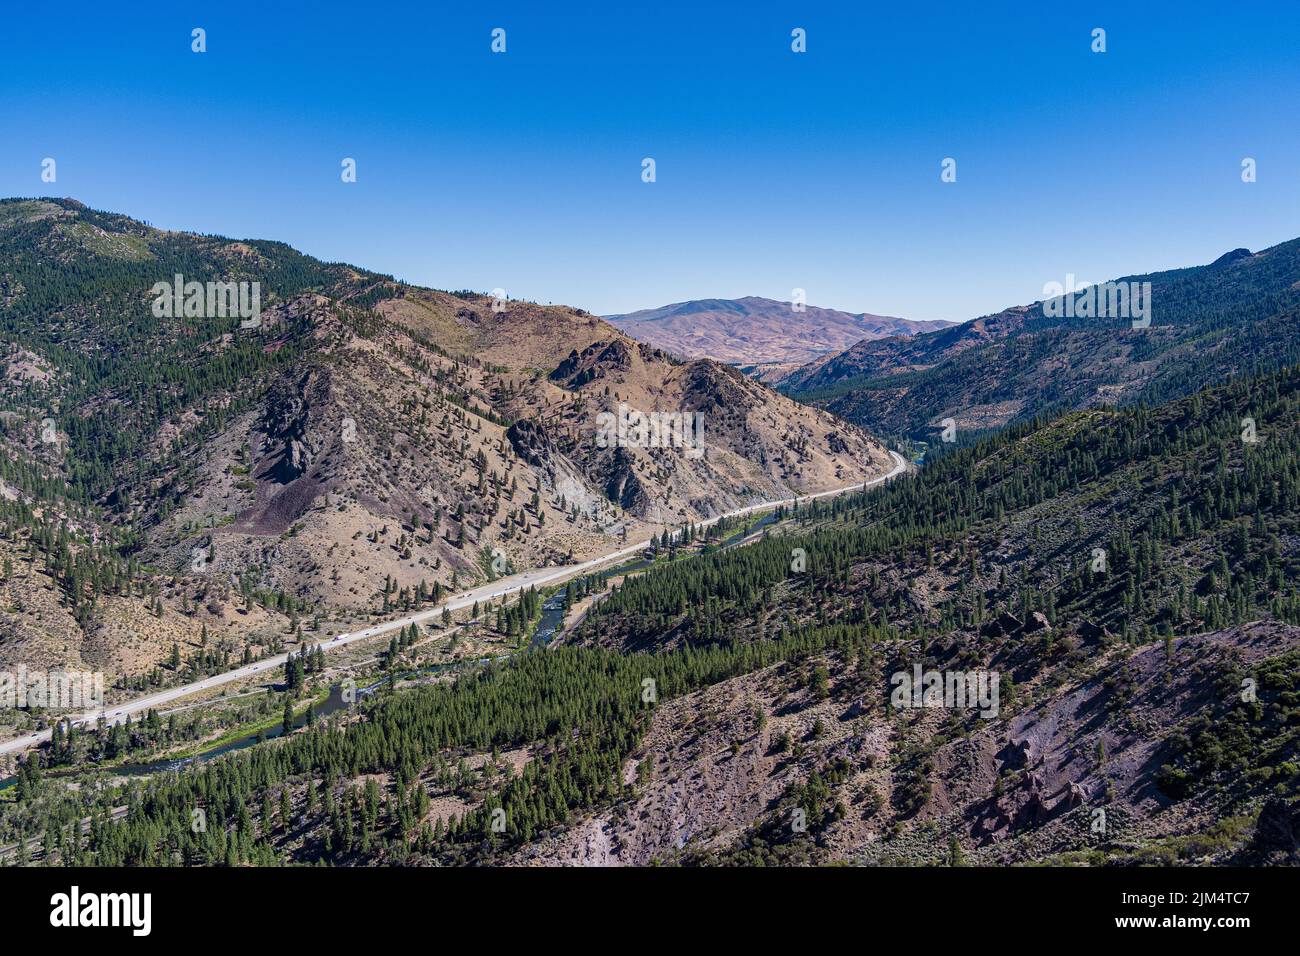 American Highway system runs through a deep canyon in the Sierra Nevada mountains of northern California. Stock Photo